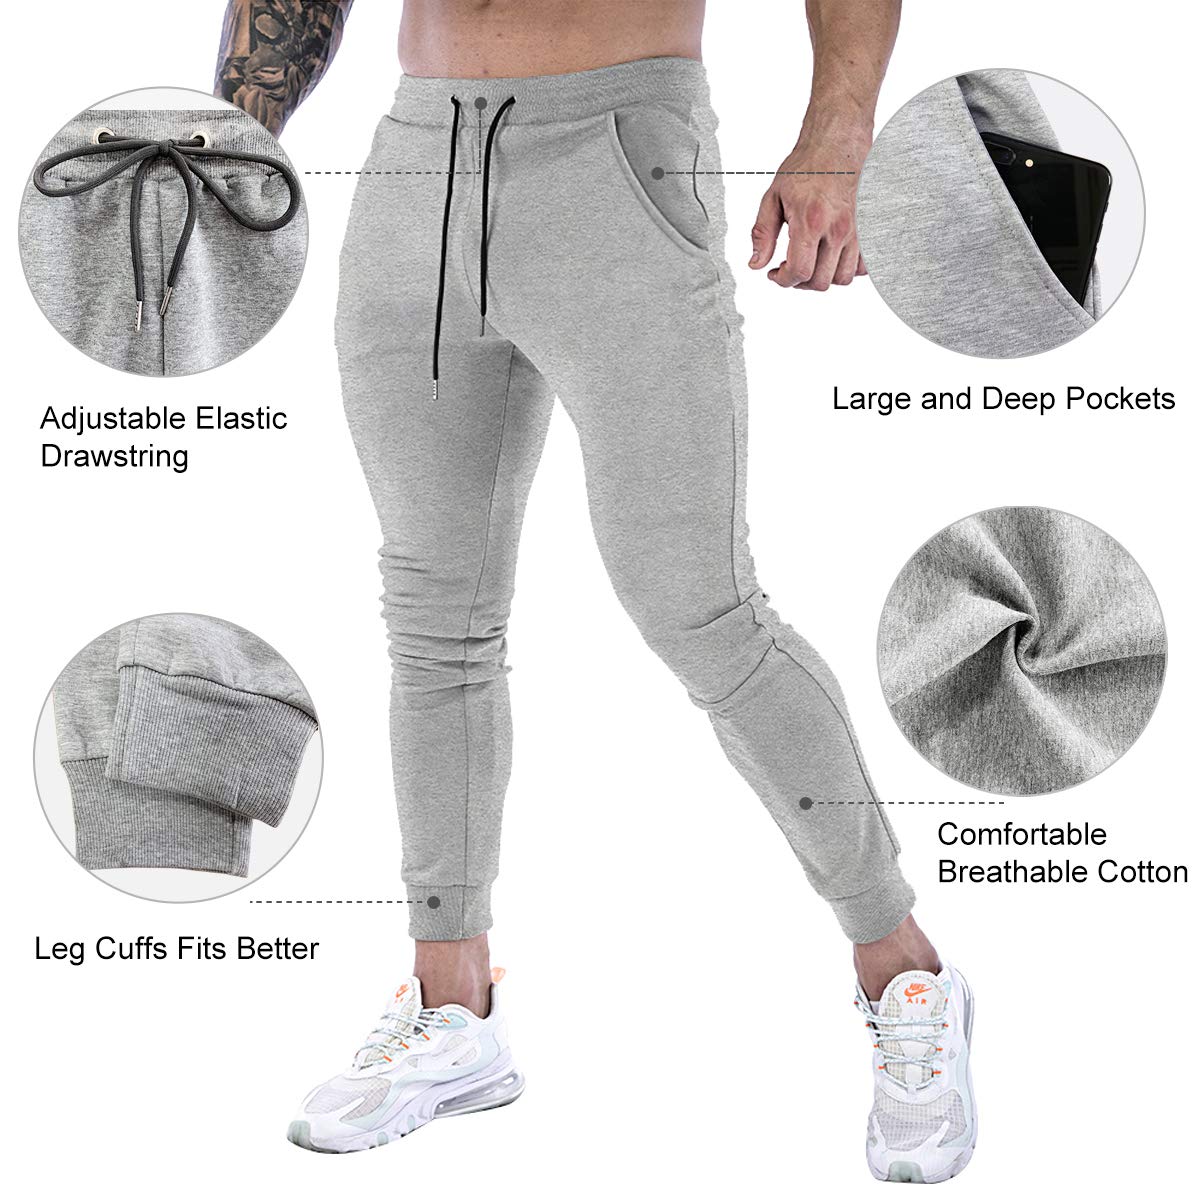 Wangdo Men's Slim Joggers Gym Workout Pants,Sport Training Tapered Sweatpants,Casual Athletics Joggers for Running (Grey-L)